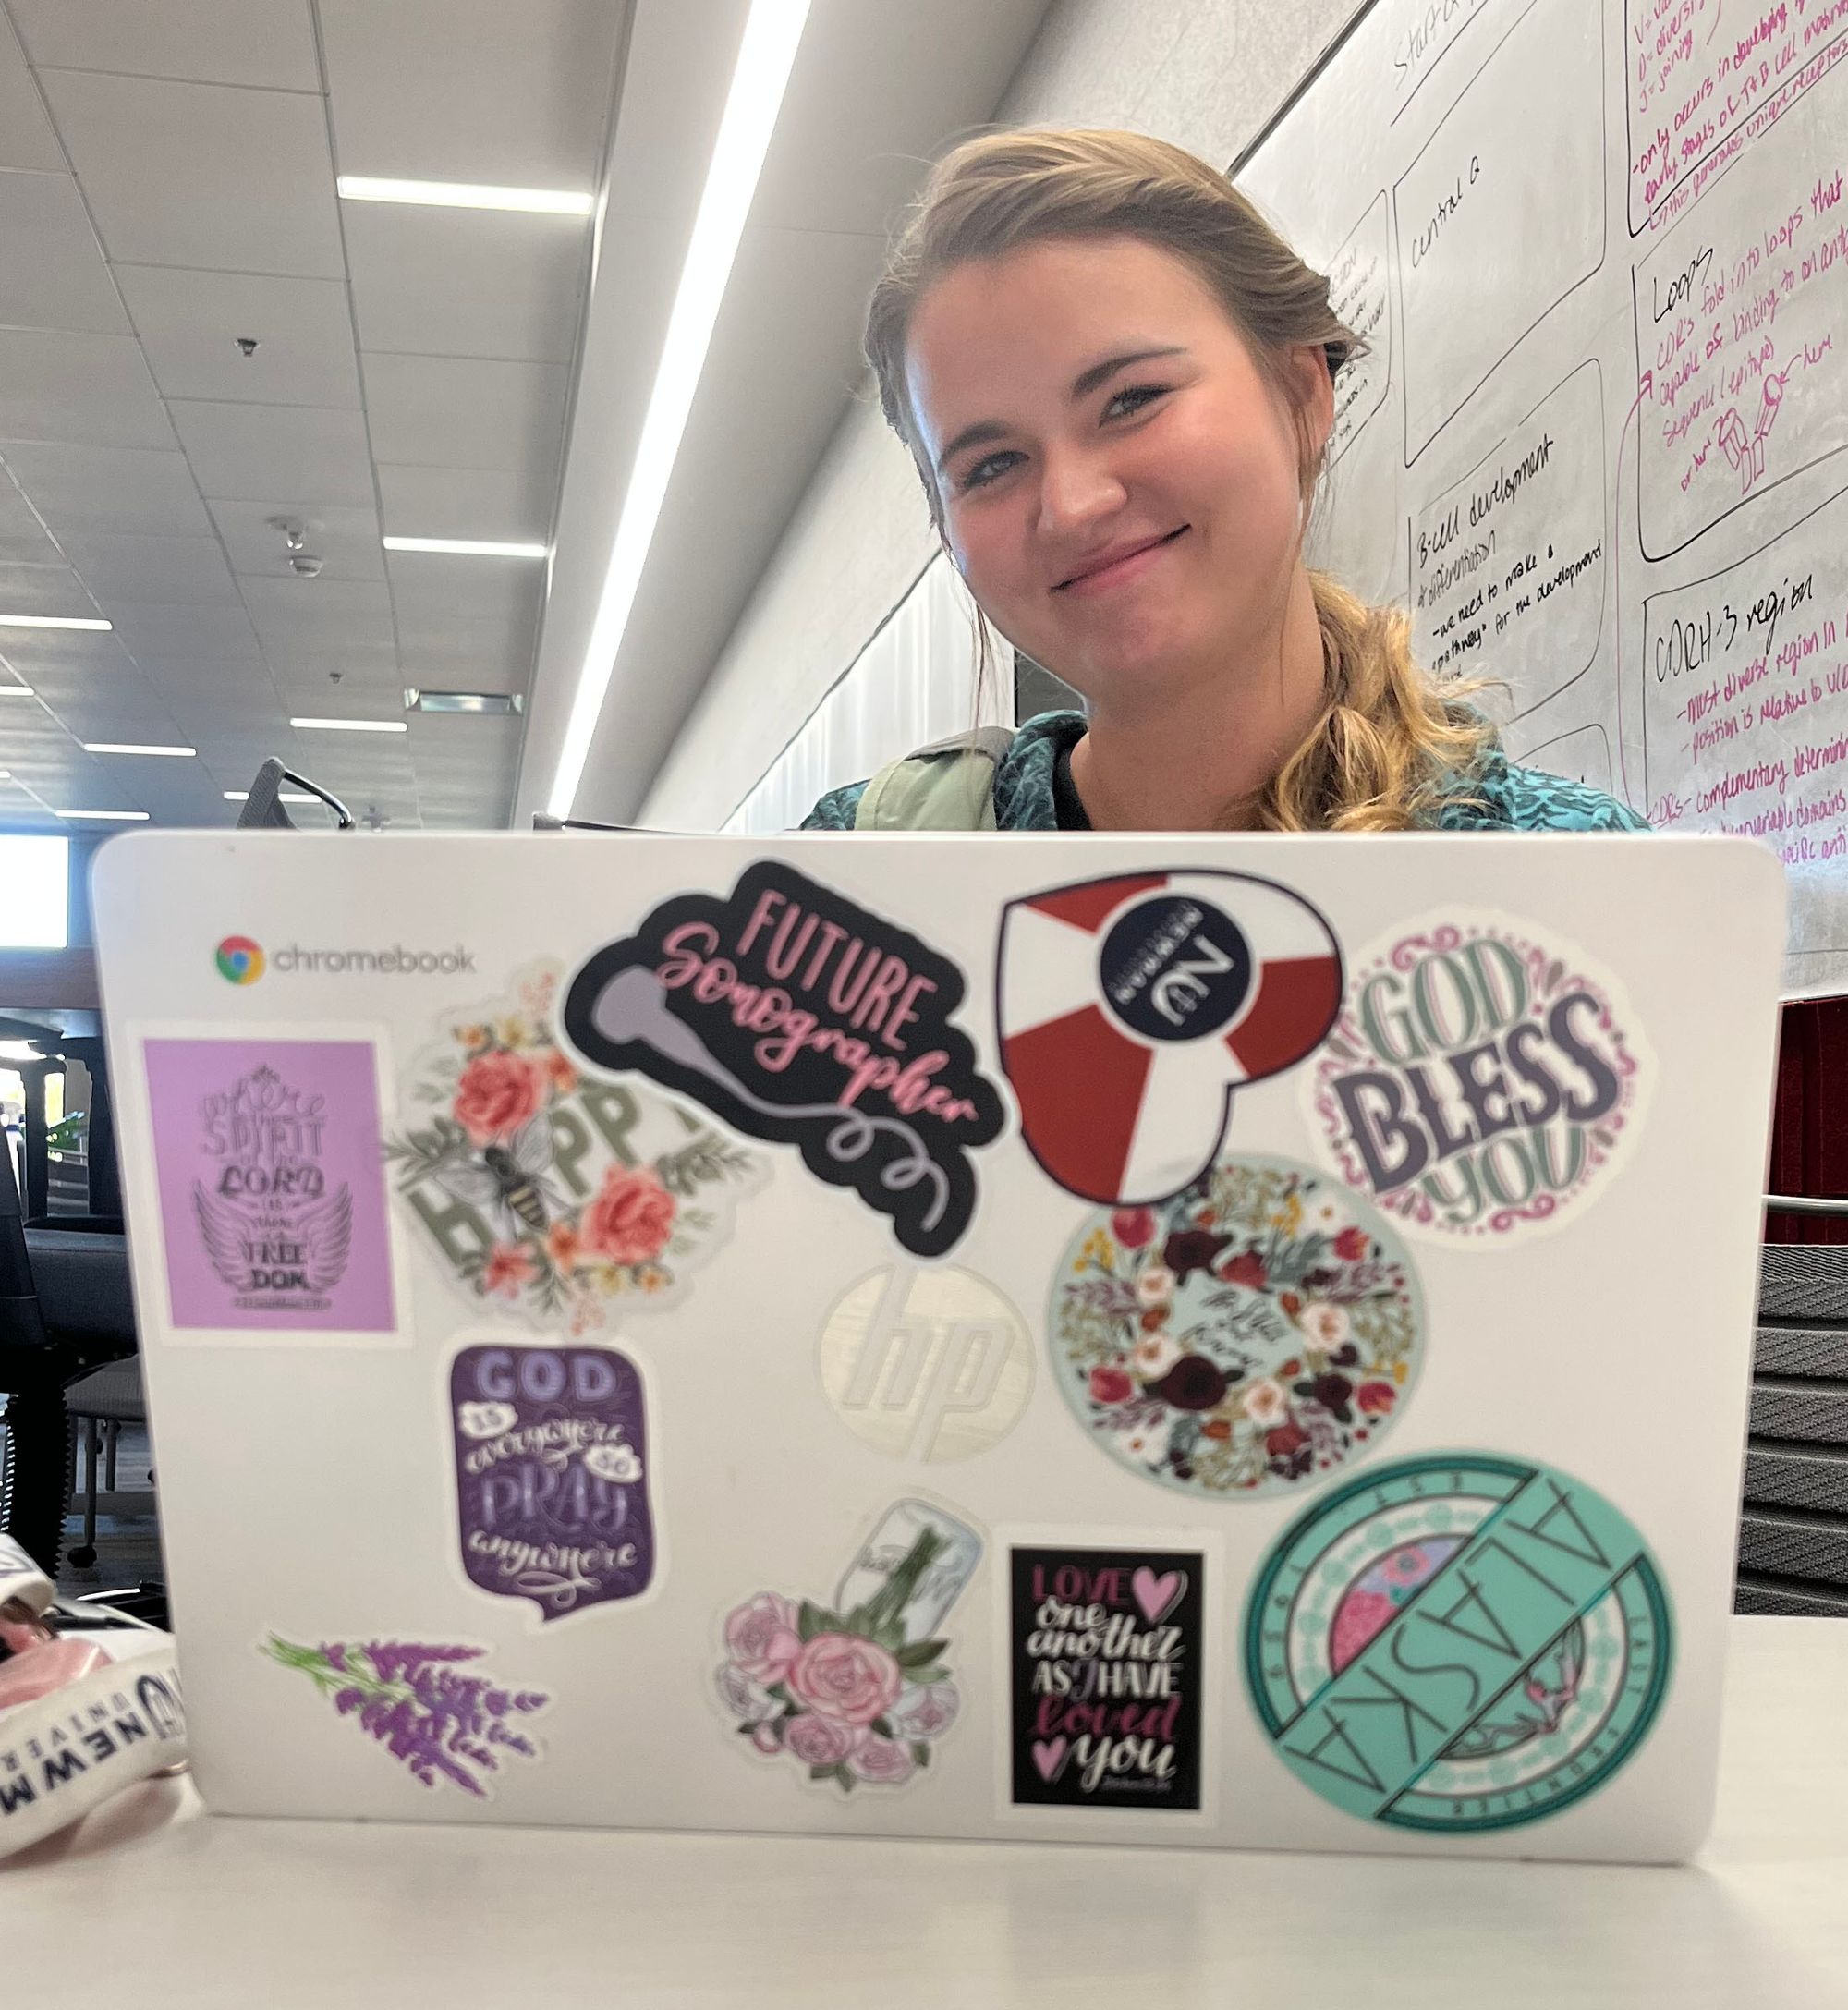 Students express themselves with laptop, water bottle stickers